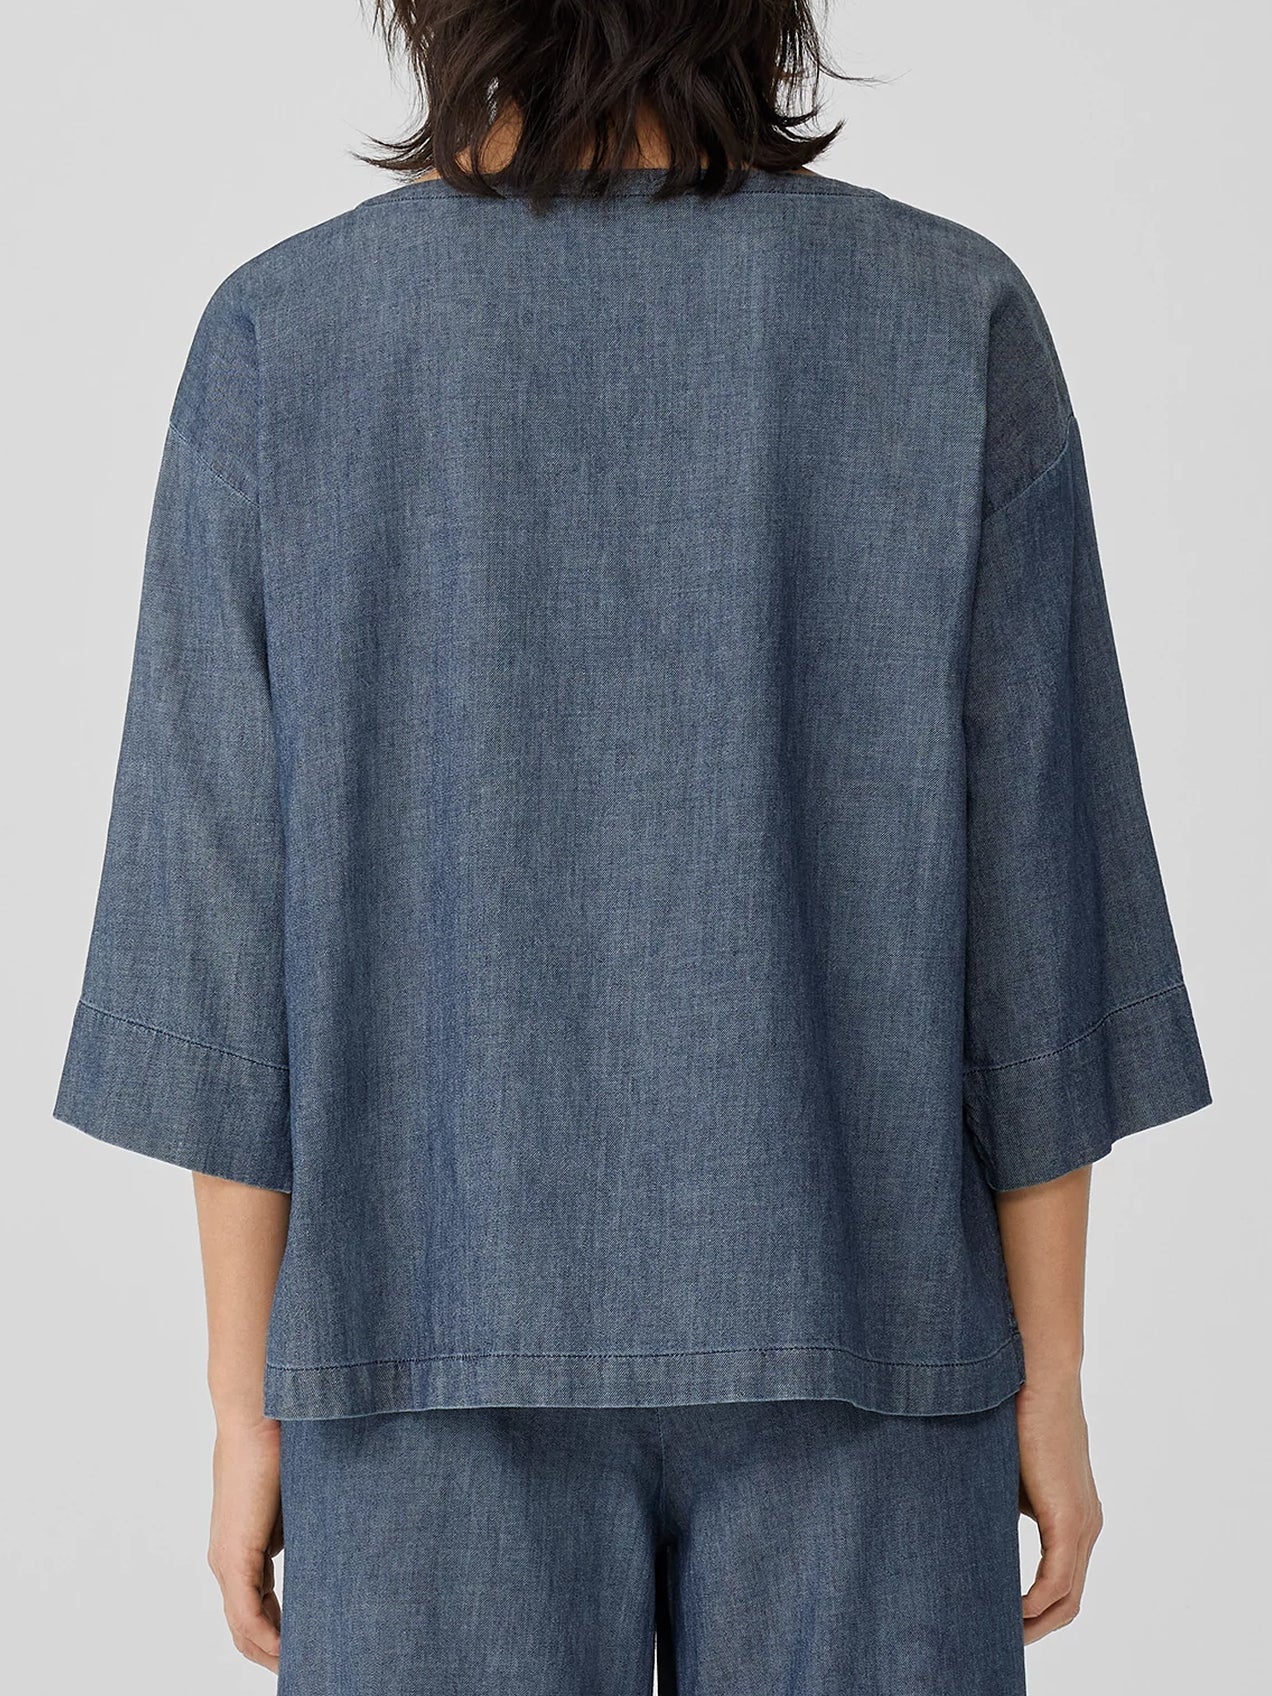 Cotton And Linen Twill Bateau Neck Top